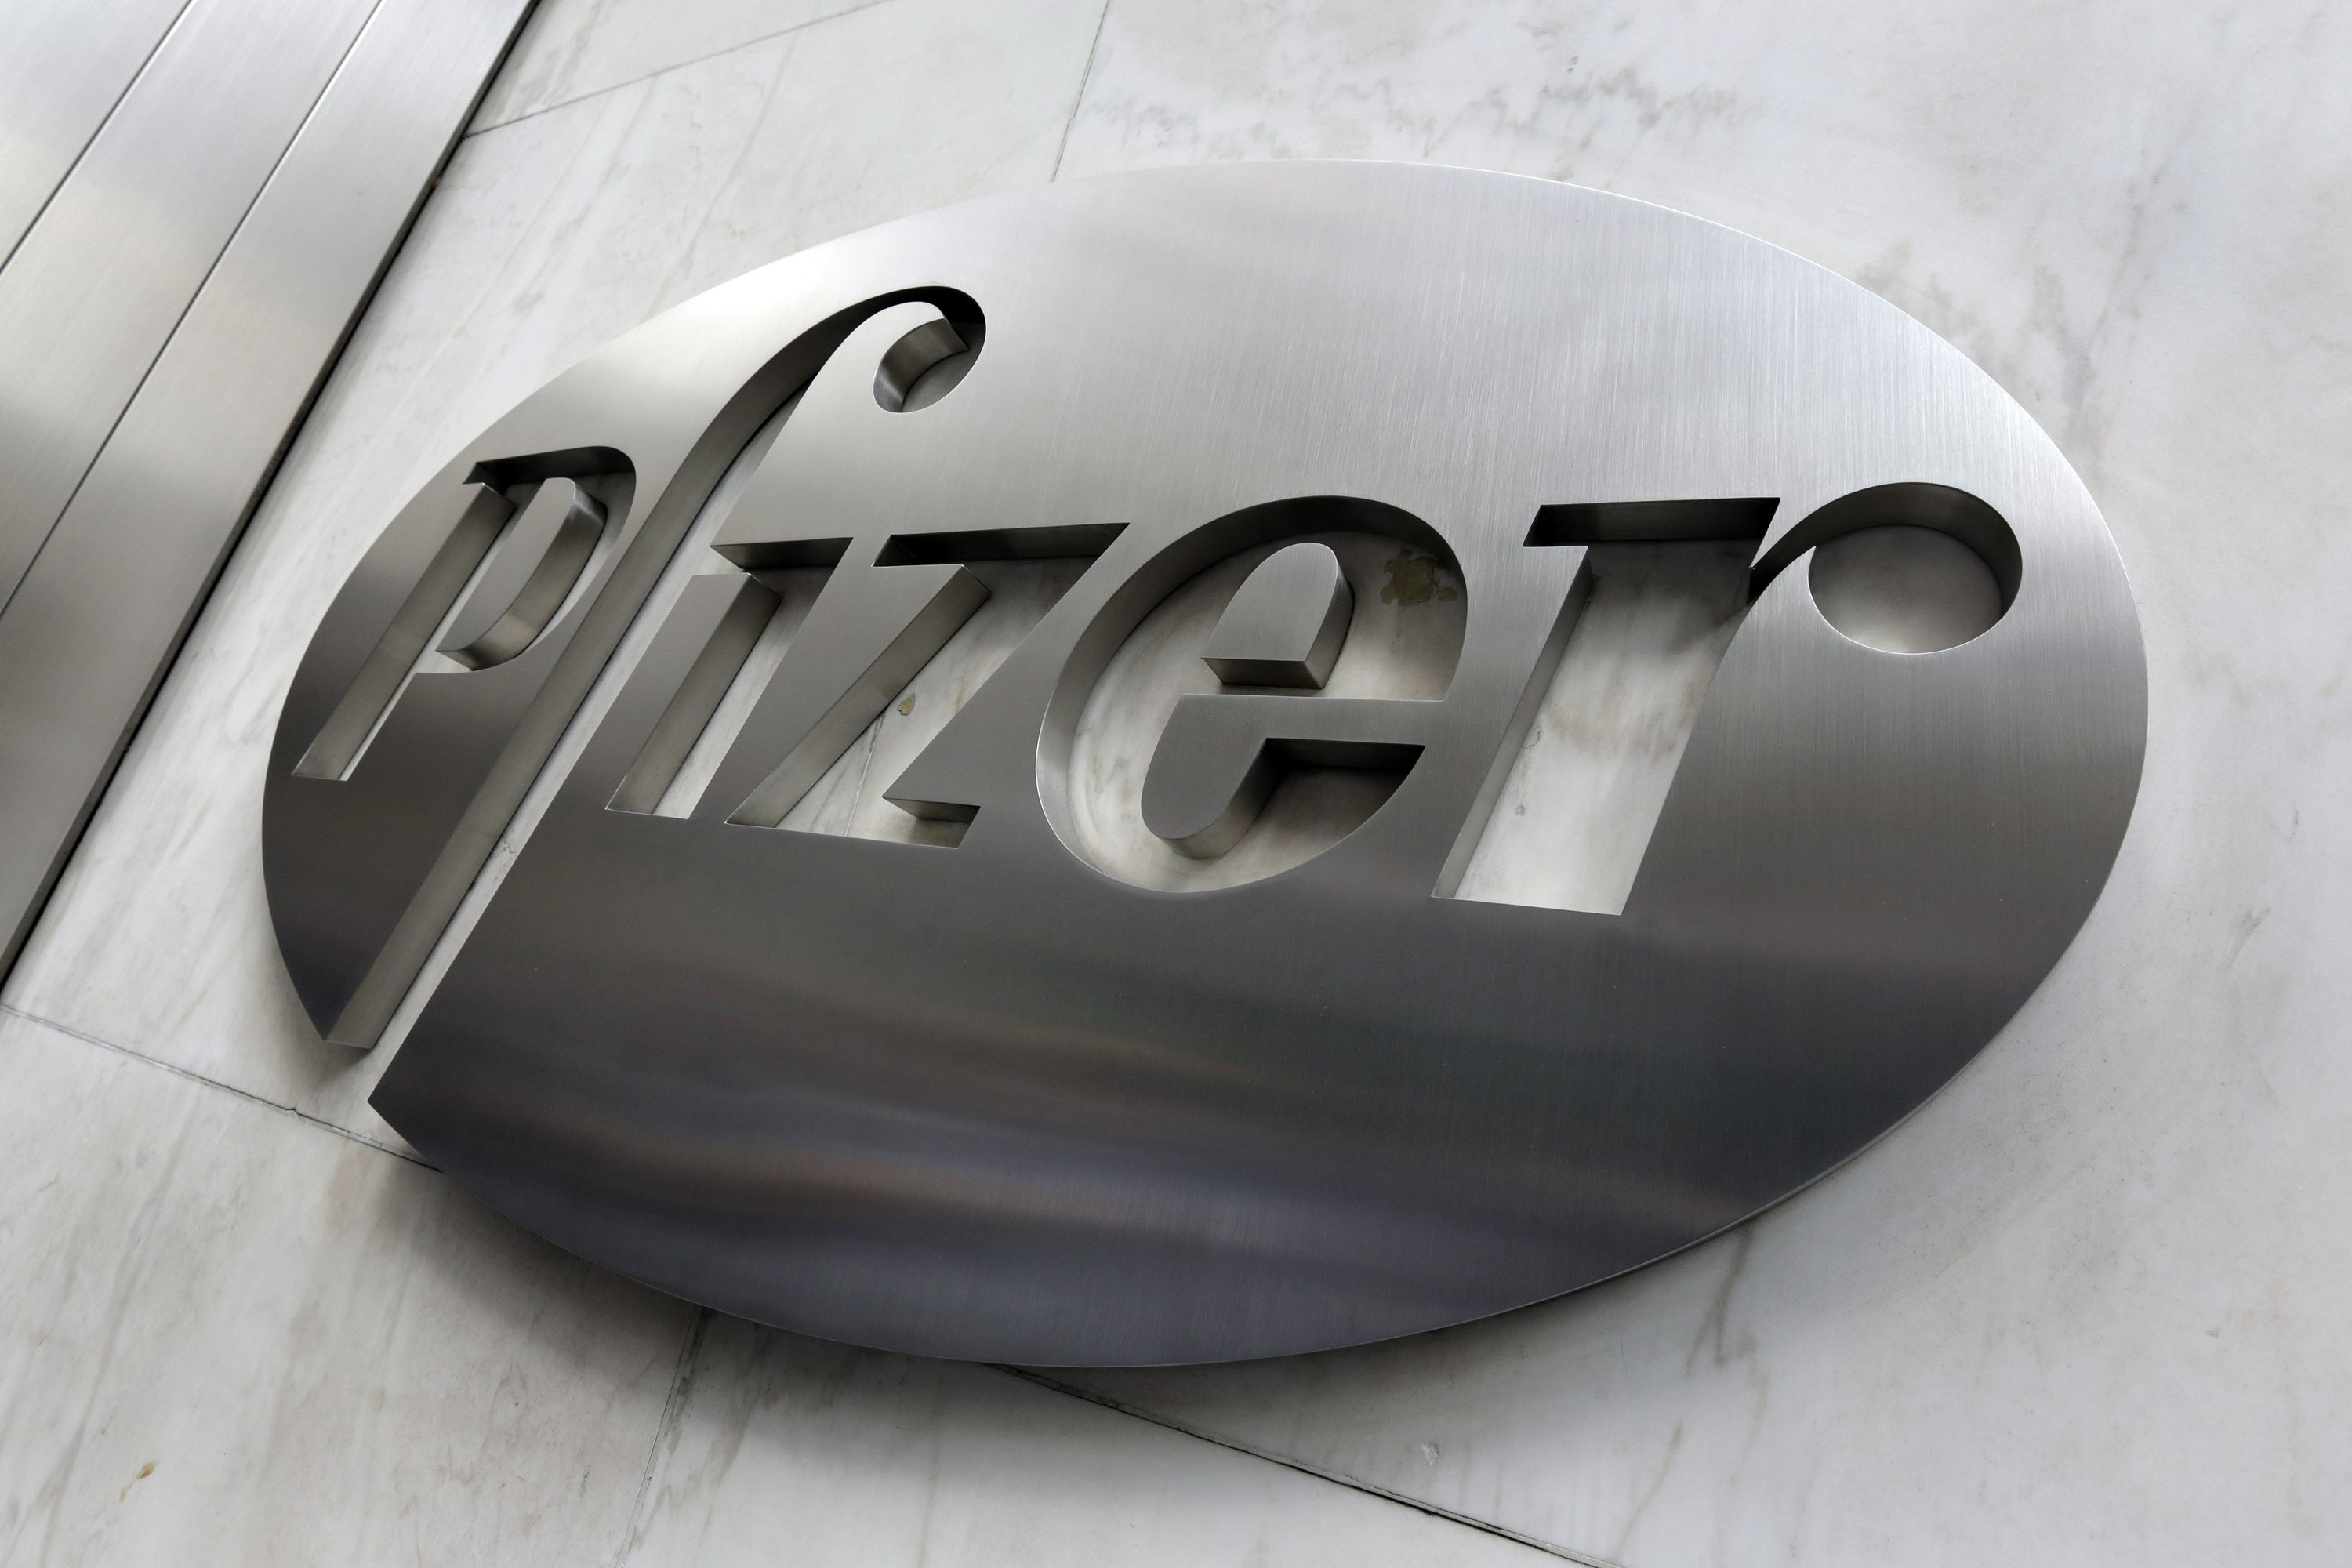 Pfizer has secret government contracts for COVID vaccines: Advocacy group says company puts profits over public health and reveals seven of its contracts are worth $5BILLION